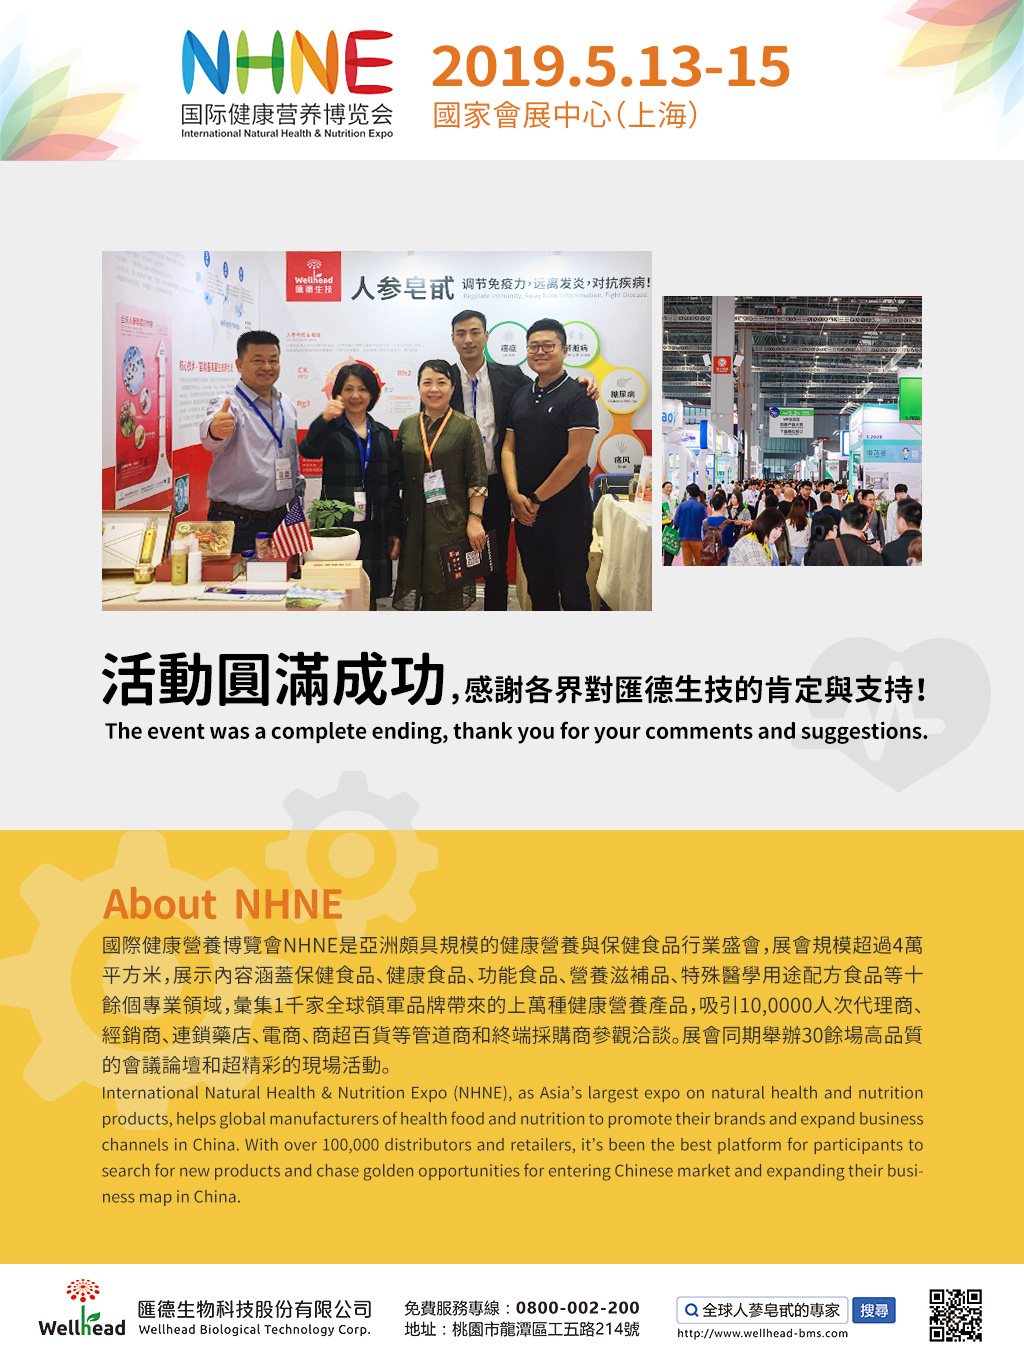 [ 2019 International Natural Health & Nutrition Expo ] The event was a complete success, wonderful review